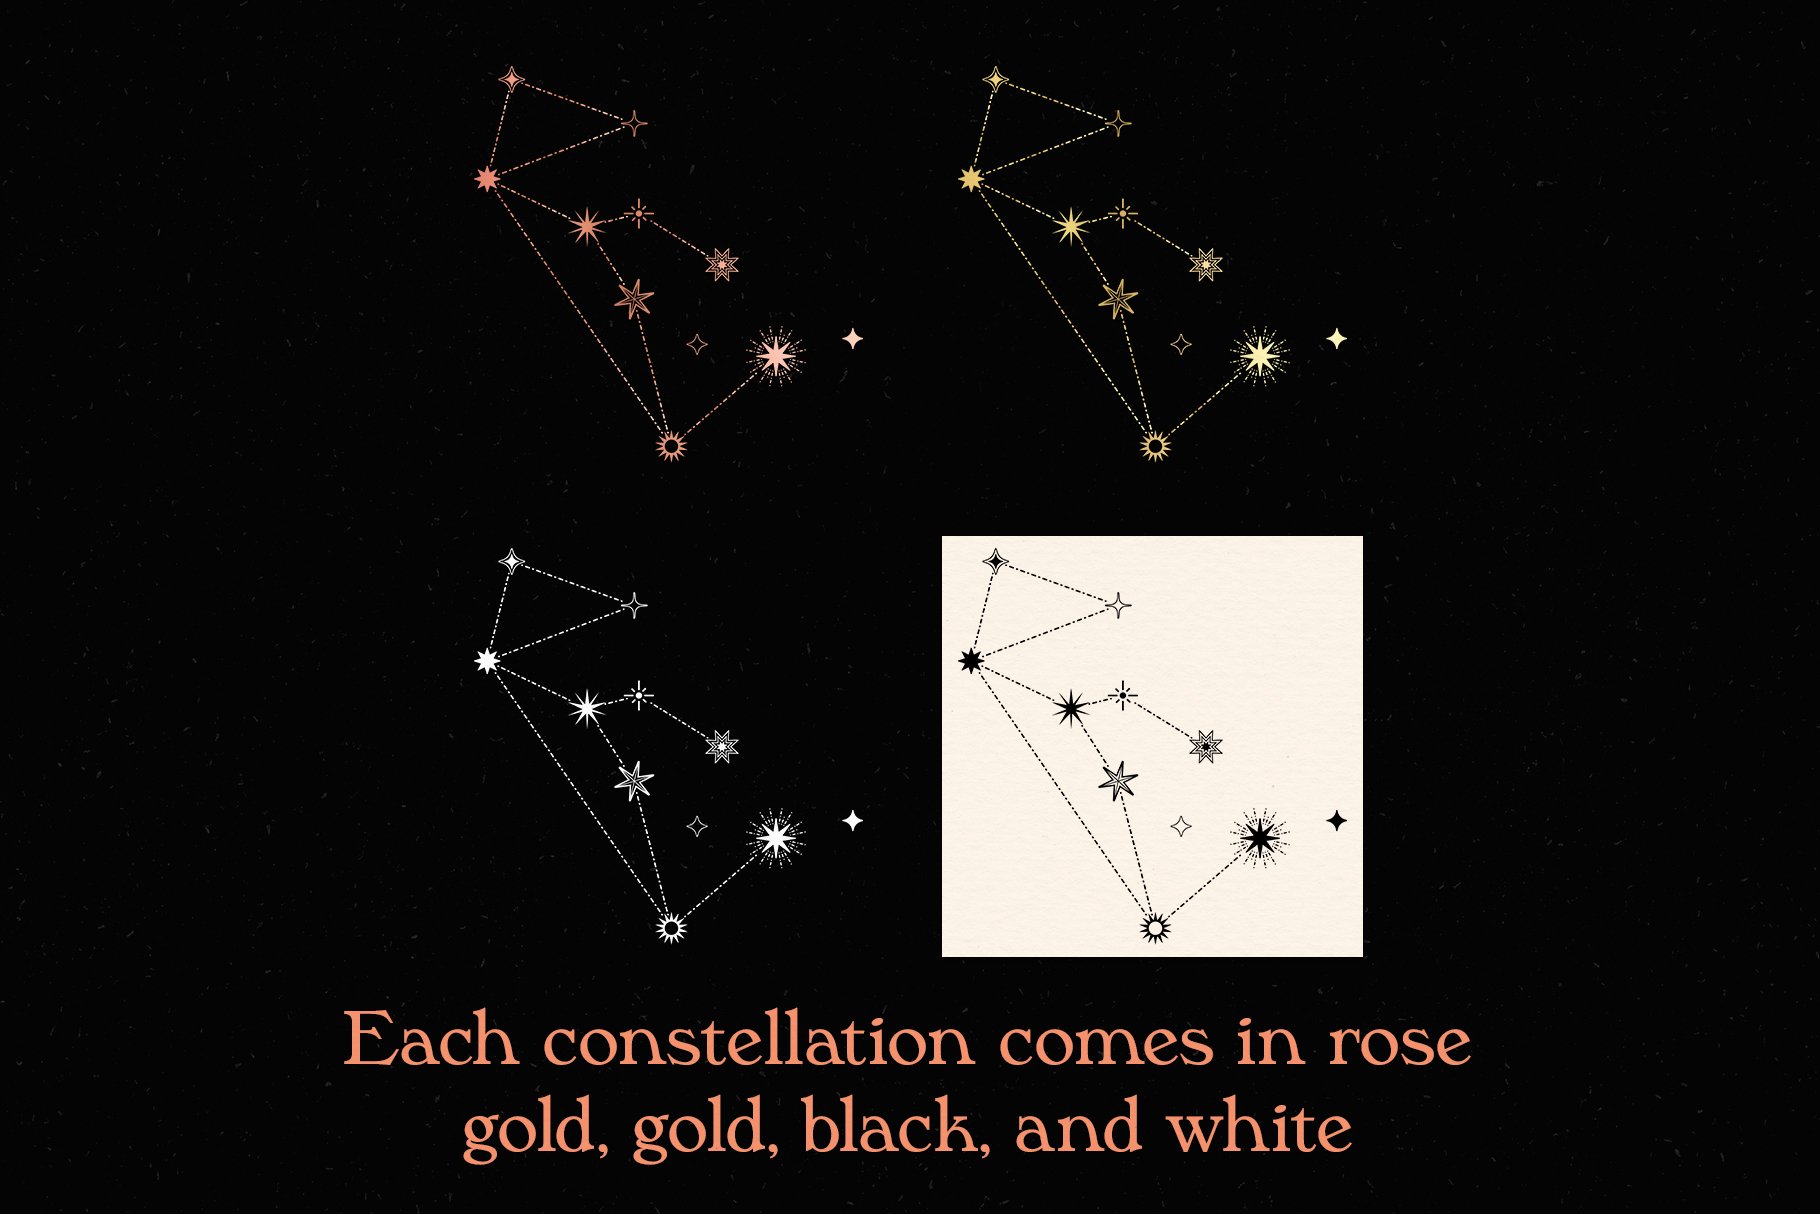 88 star constellations by megs lang prvw 007 692